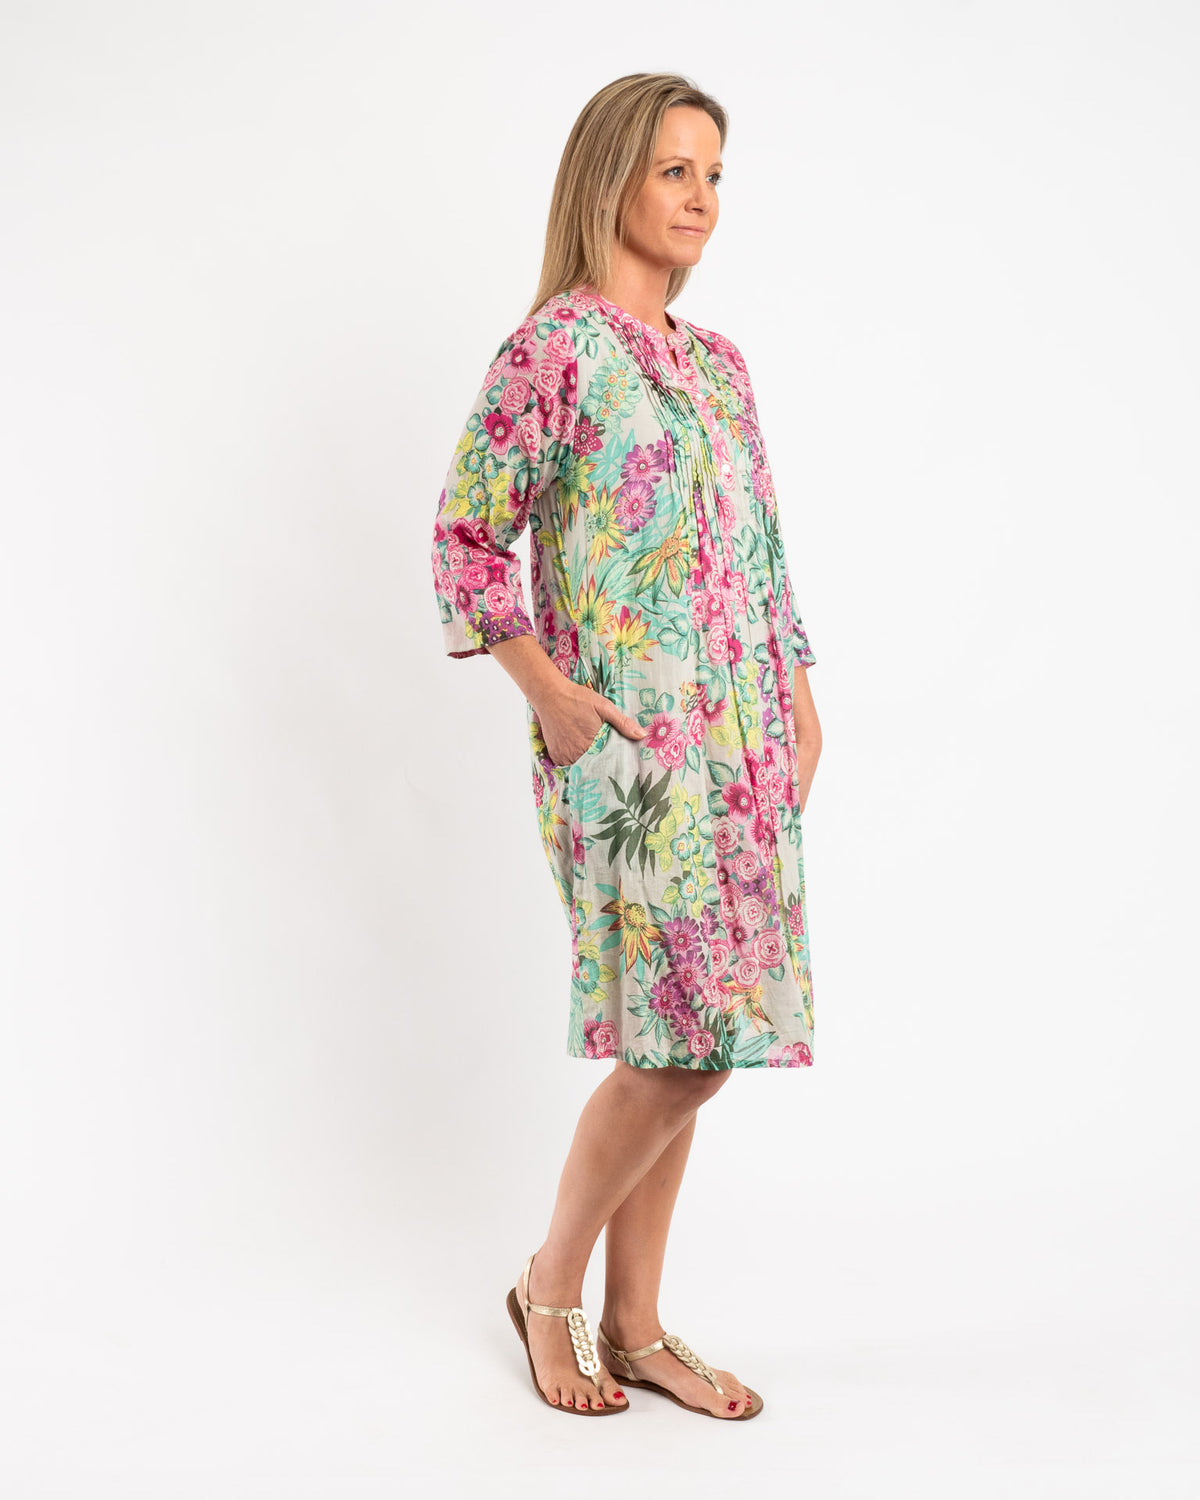 Lined Summer Dress in Pink and Pale Green Floral